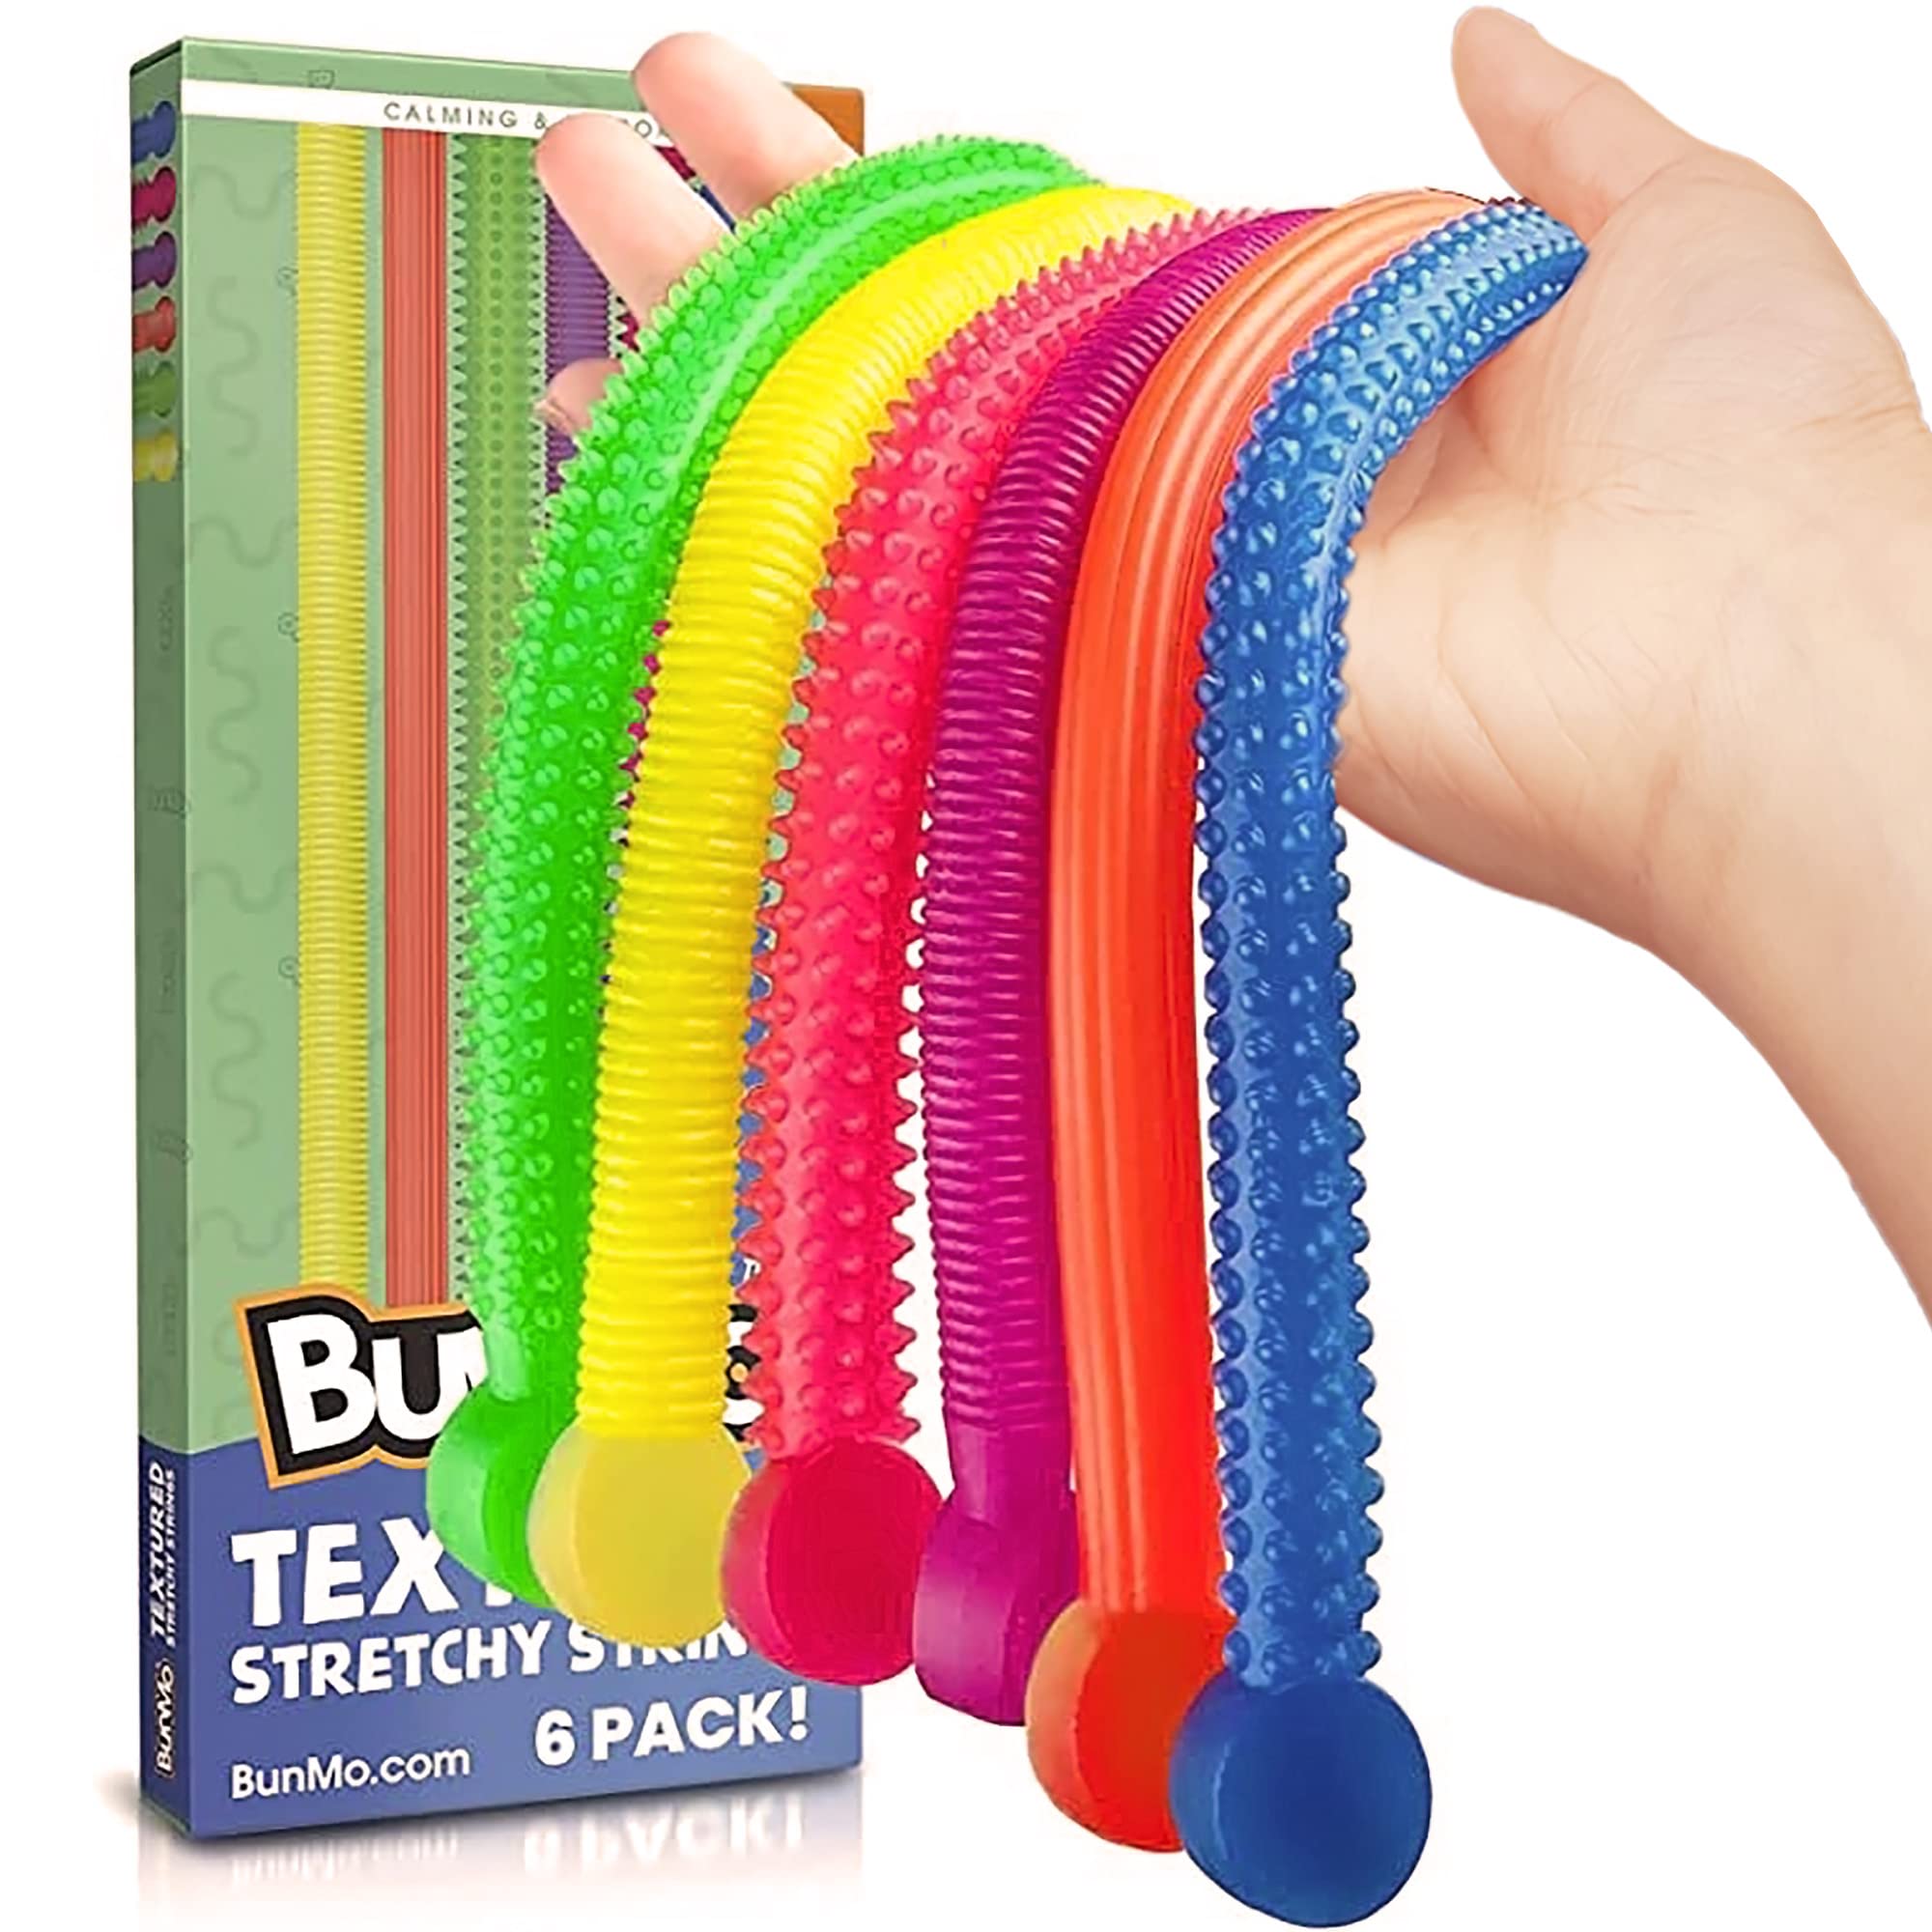 BUNMO Textured Stretchy Strings 6pk | Calming & Textured Autism Sensory Toys | Monkey Stretch Noodles | Fidget Noodles | Monkey Noodles | Sensory Noodle Strings